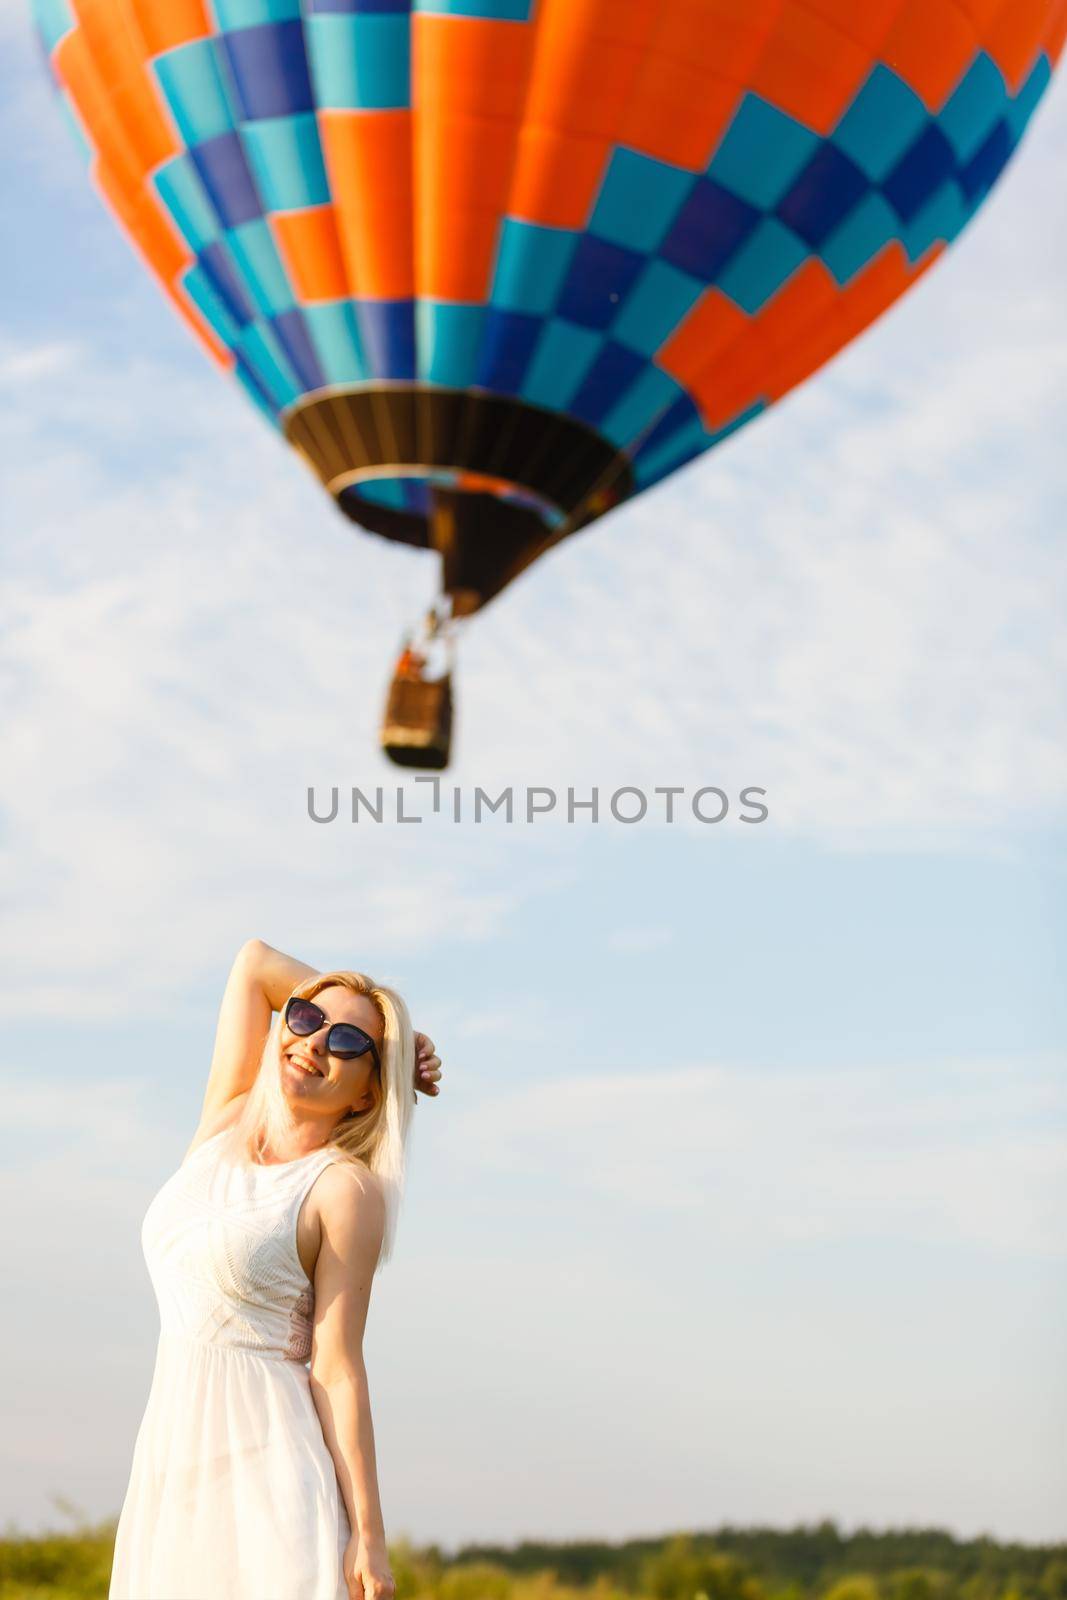 Girl and a hot air balloon by Andelov13